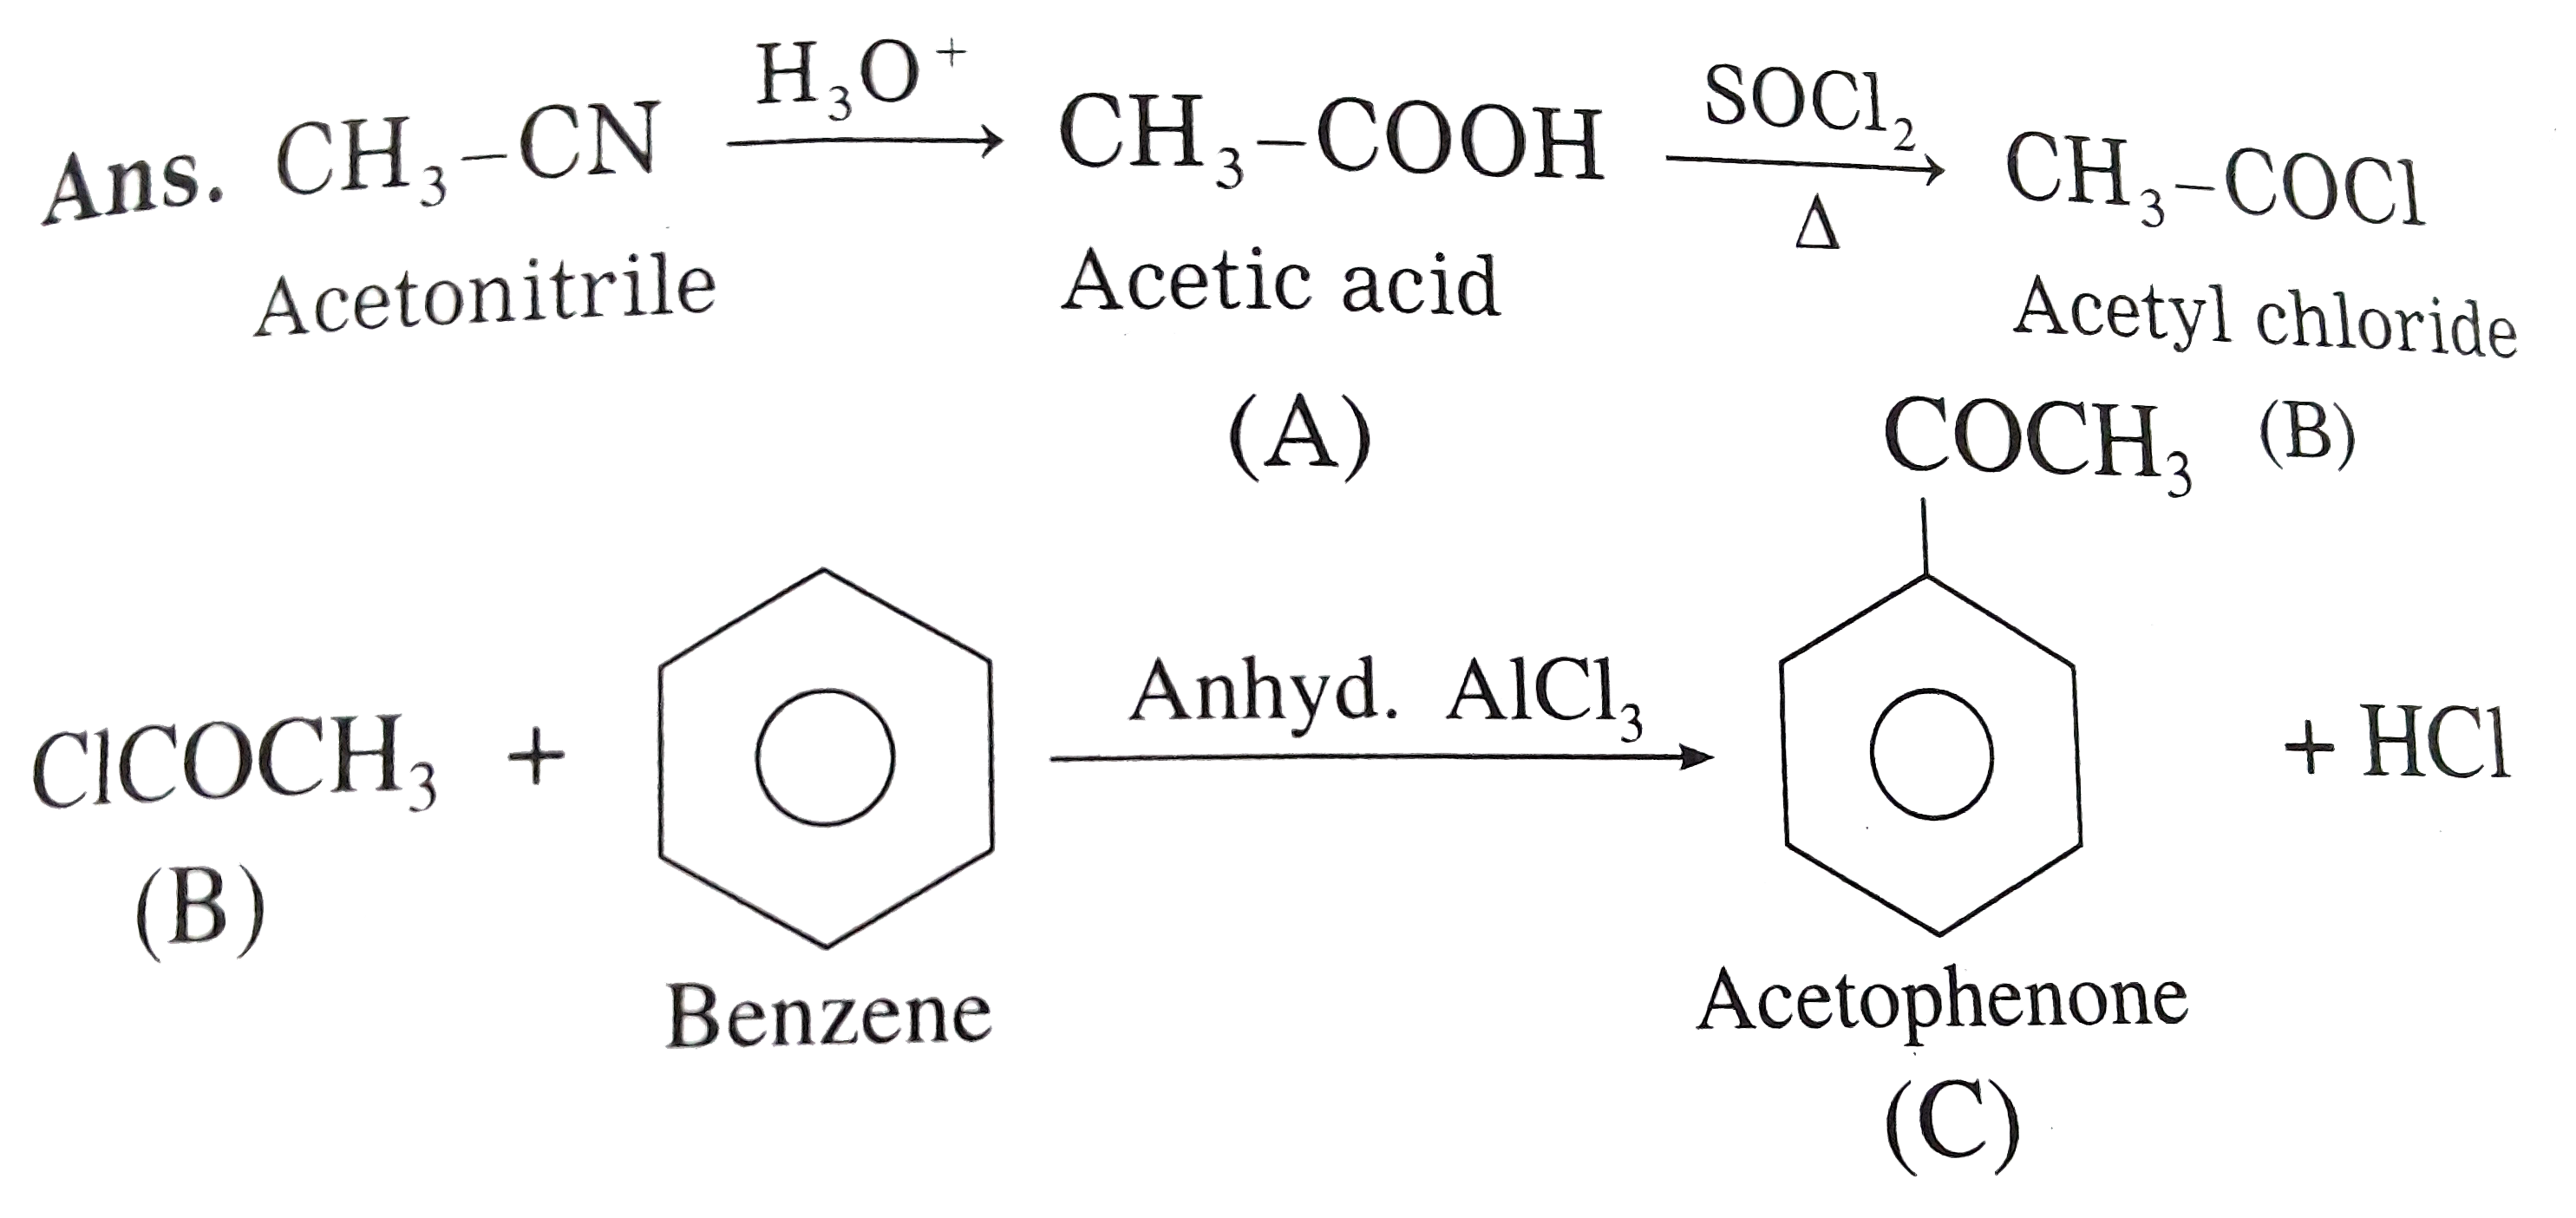 A Nitraite On Acid Hydrolysis Gives Compound A Which Reacts With